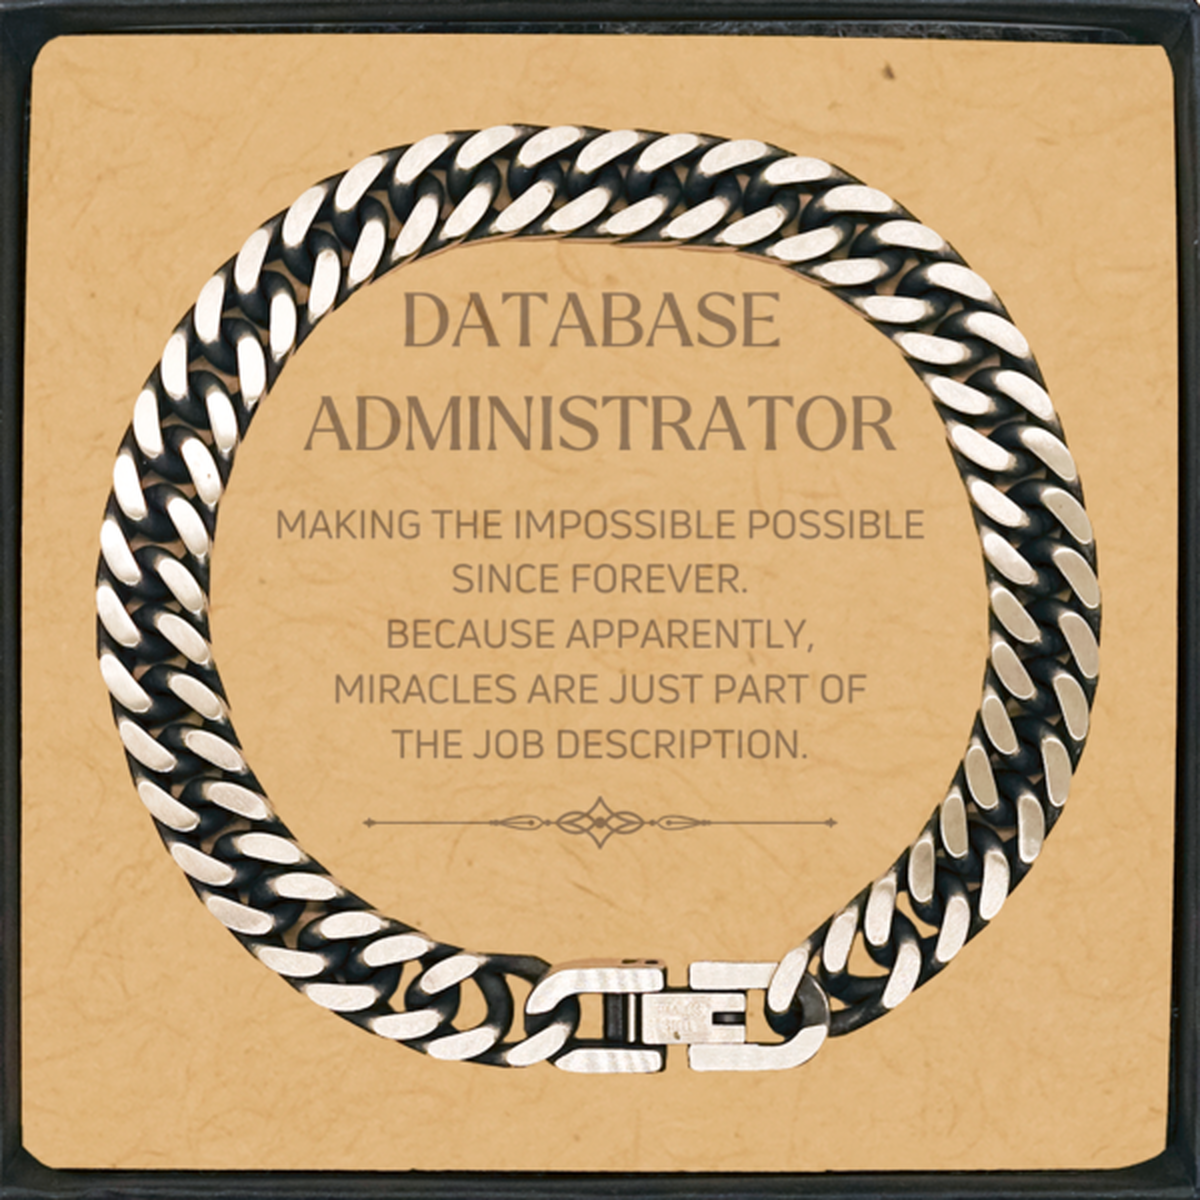 Funny Database Administrator Gifts, Miracles are just part of the job description, Inspirational Birthday Cuban Link Chain Bracelet For Database Administrator, Men, Women, Coworkers, Friends, Boss